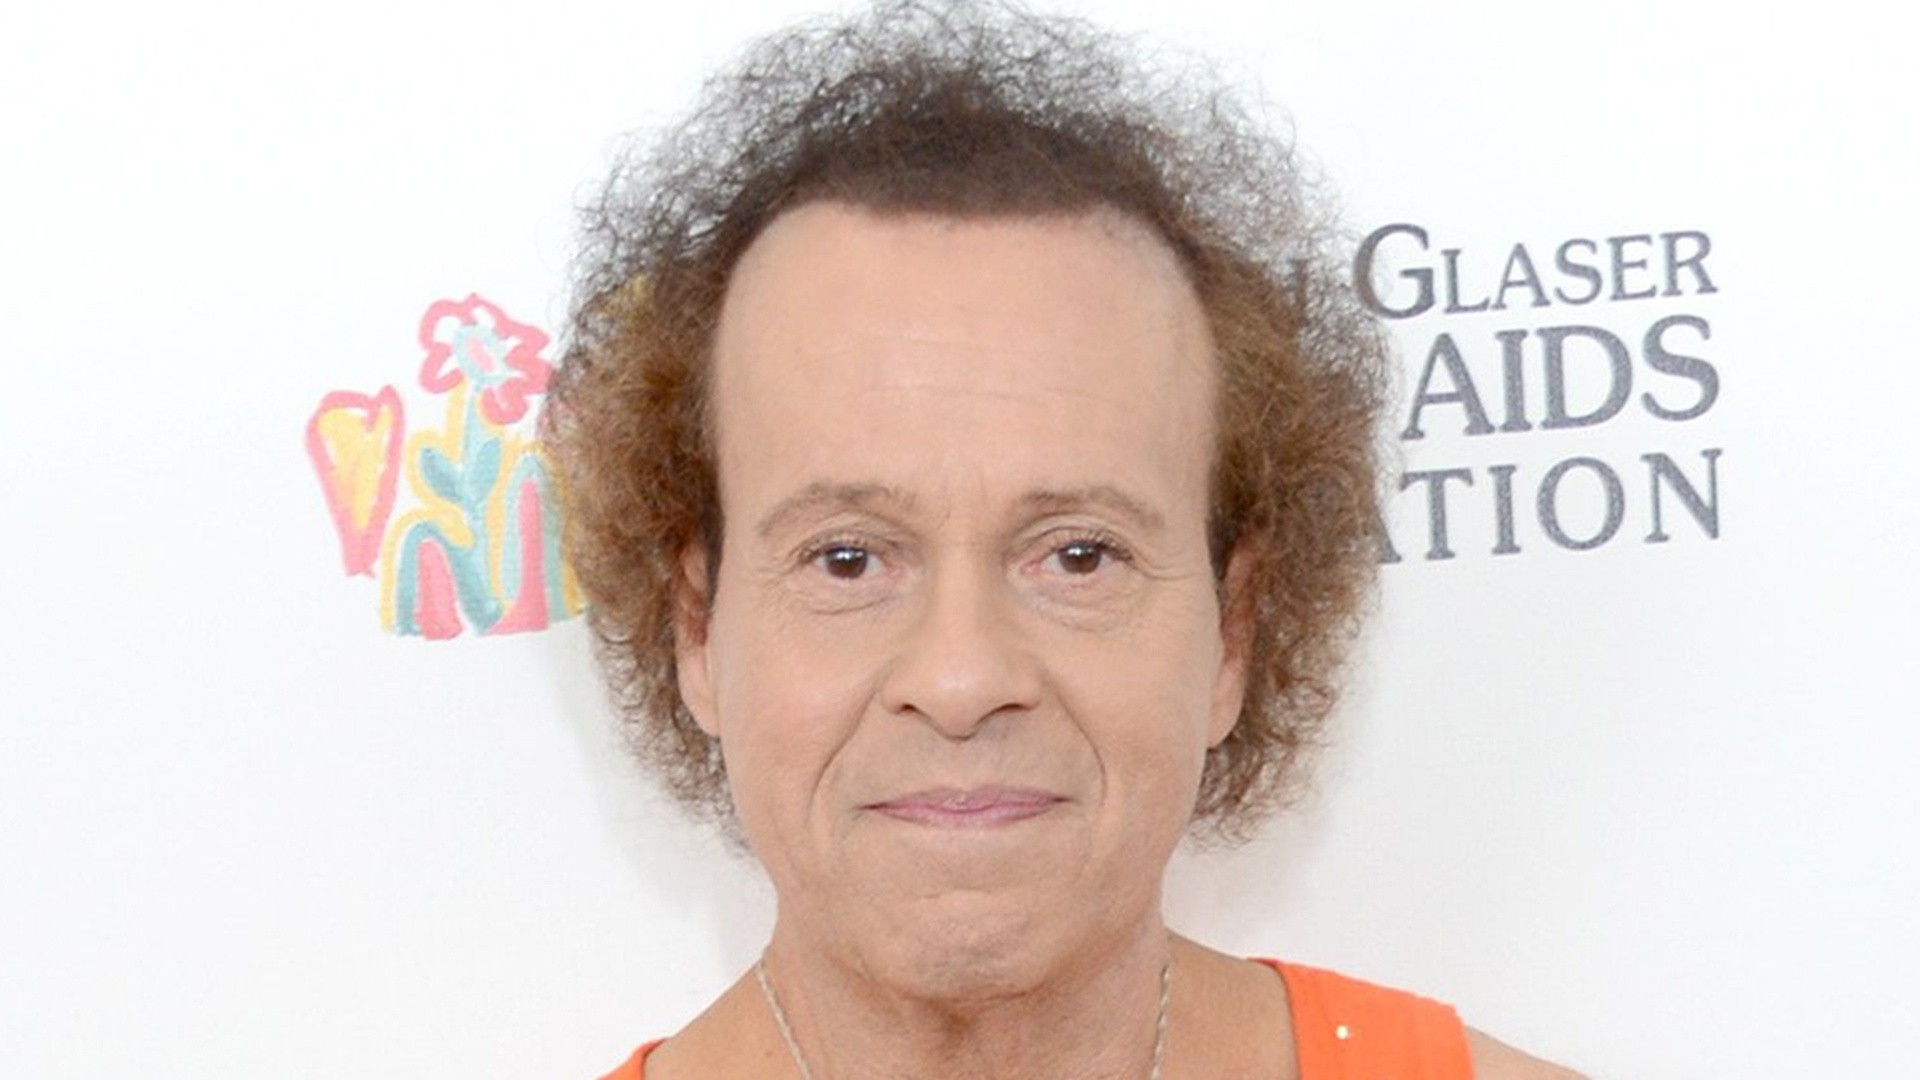 Richard Simmons sparks concern over posts saying he's 'dying'